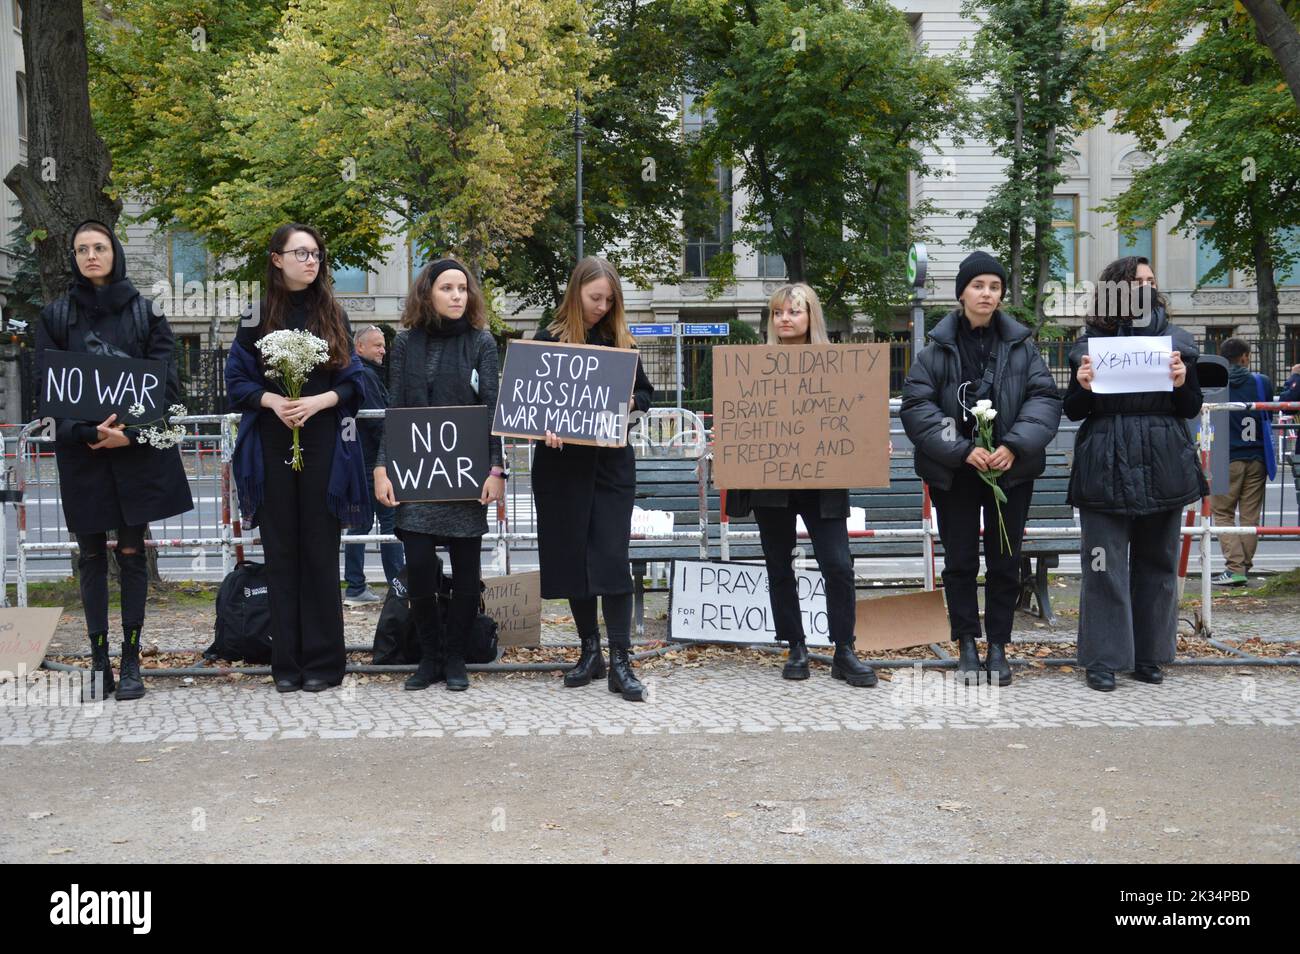 Berlin, Germany - September 24, 2022 - Women in Black - Demonstration in front of the Russian Embassy at Unter den Linden against the war in Ukraine and the military mobilization in Russia. (Photo by Markku Rainer Peltonen) Stock Photo